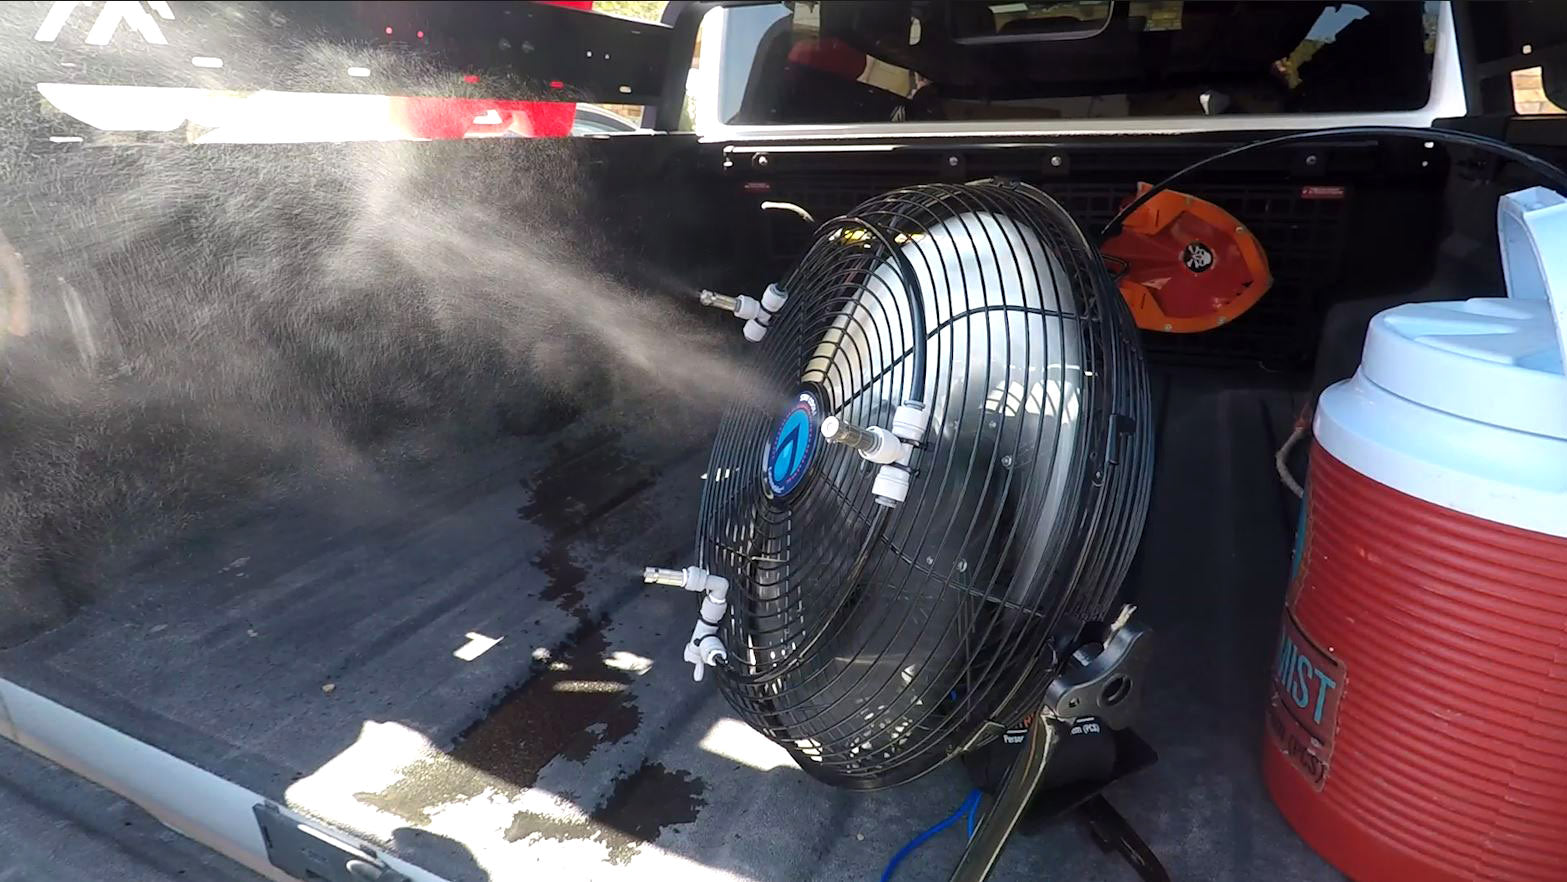 portable misting fan and water cooler on truck bed